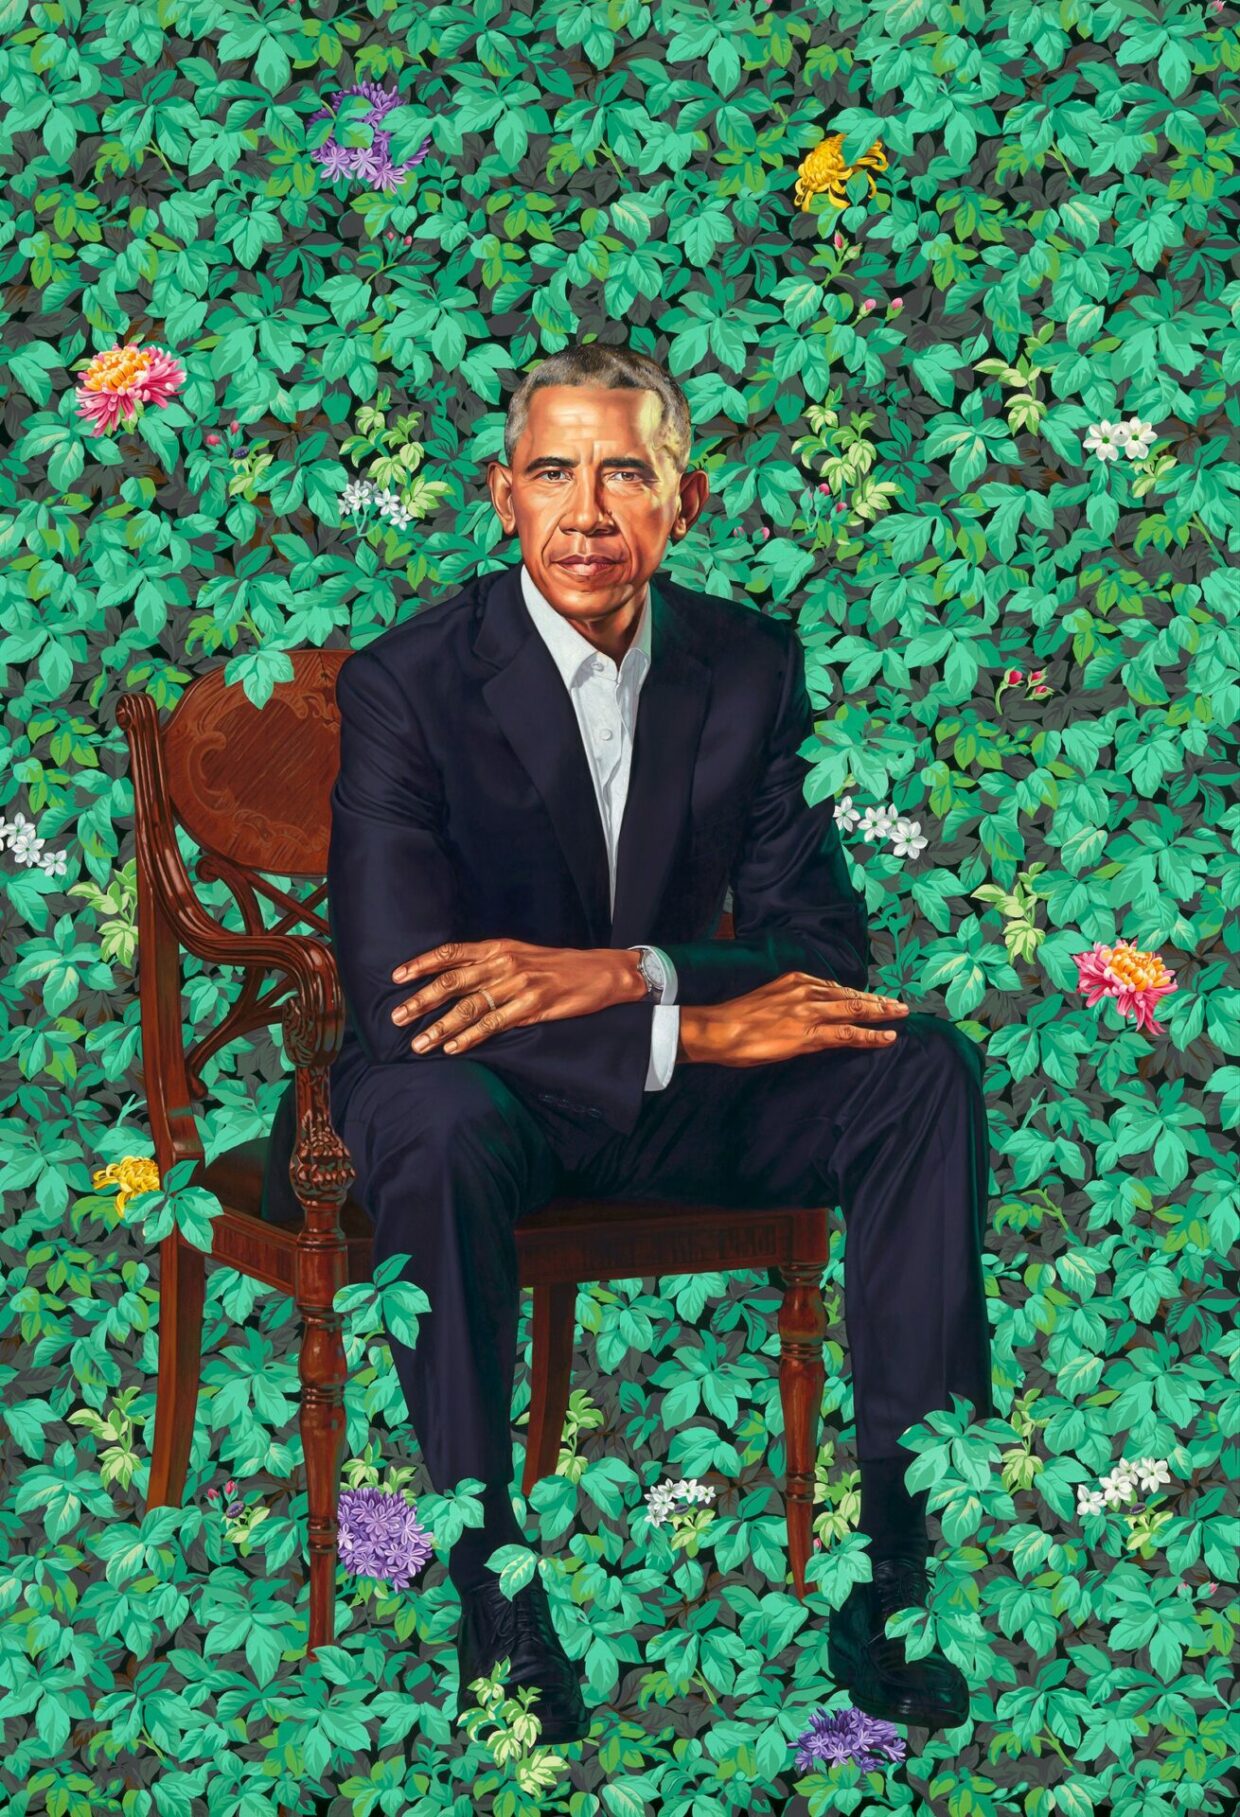 The Obama Portraits Have Landed at the Brooklyn Museum | 1